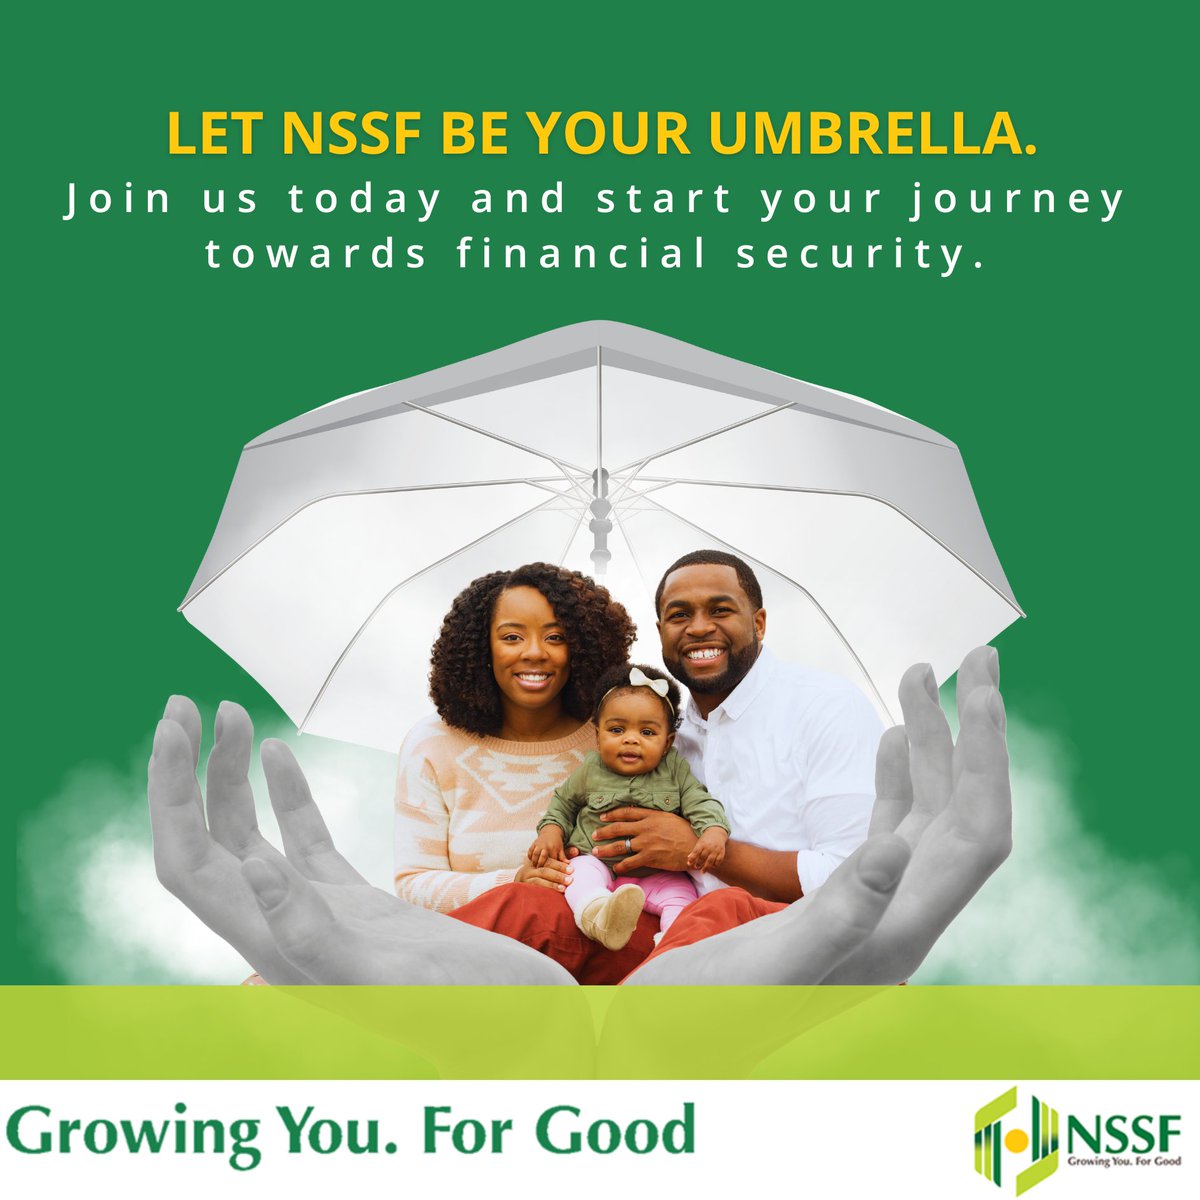 Saving for the future is like buying an umbrella when there is no sign of rain. When everything is calm. When the rain finally comes, those without umbrellas will be running helter-skelter, seeking shelter as you smile and whistle along. #LeavingNoOneBehind